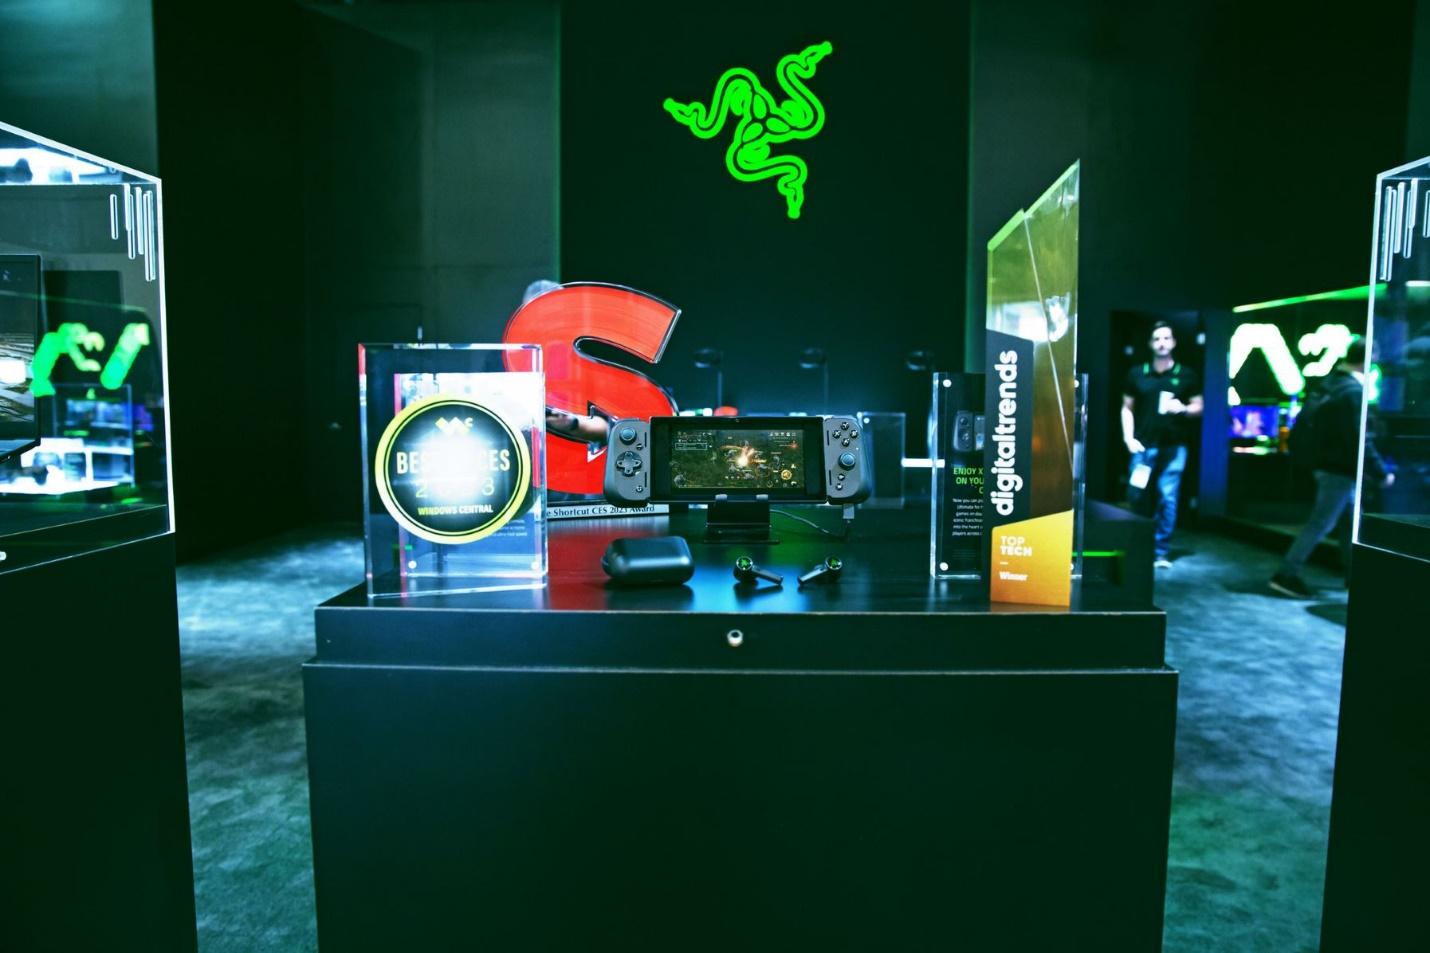 RAZER AWARDS OF 2023 HONOR TO BE THE LEADING LIFETIME BRAND IN TECHNOLOGY